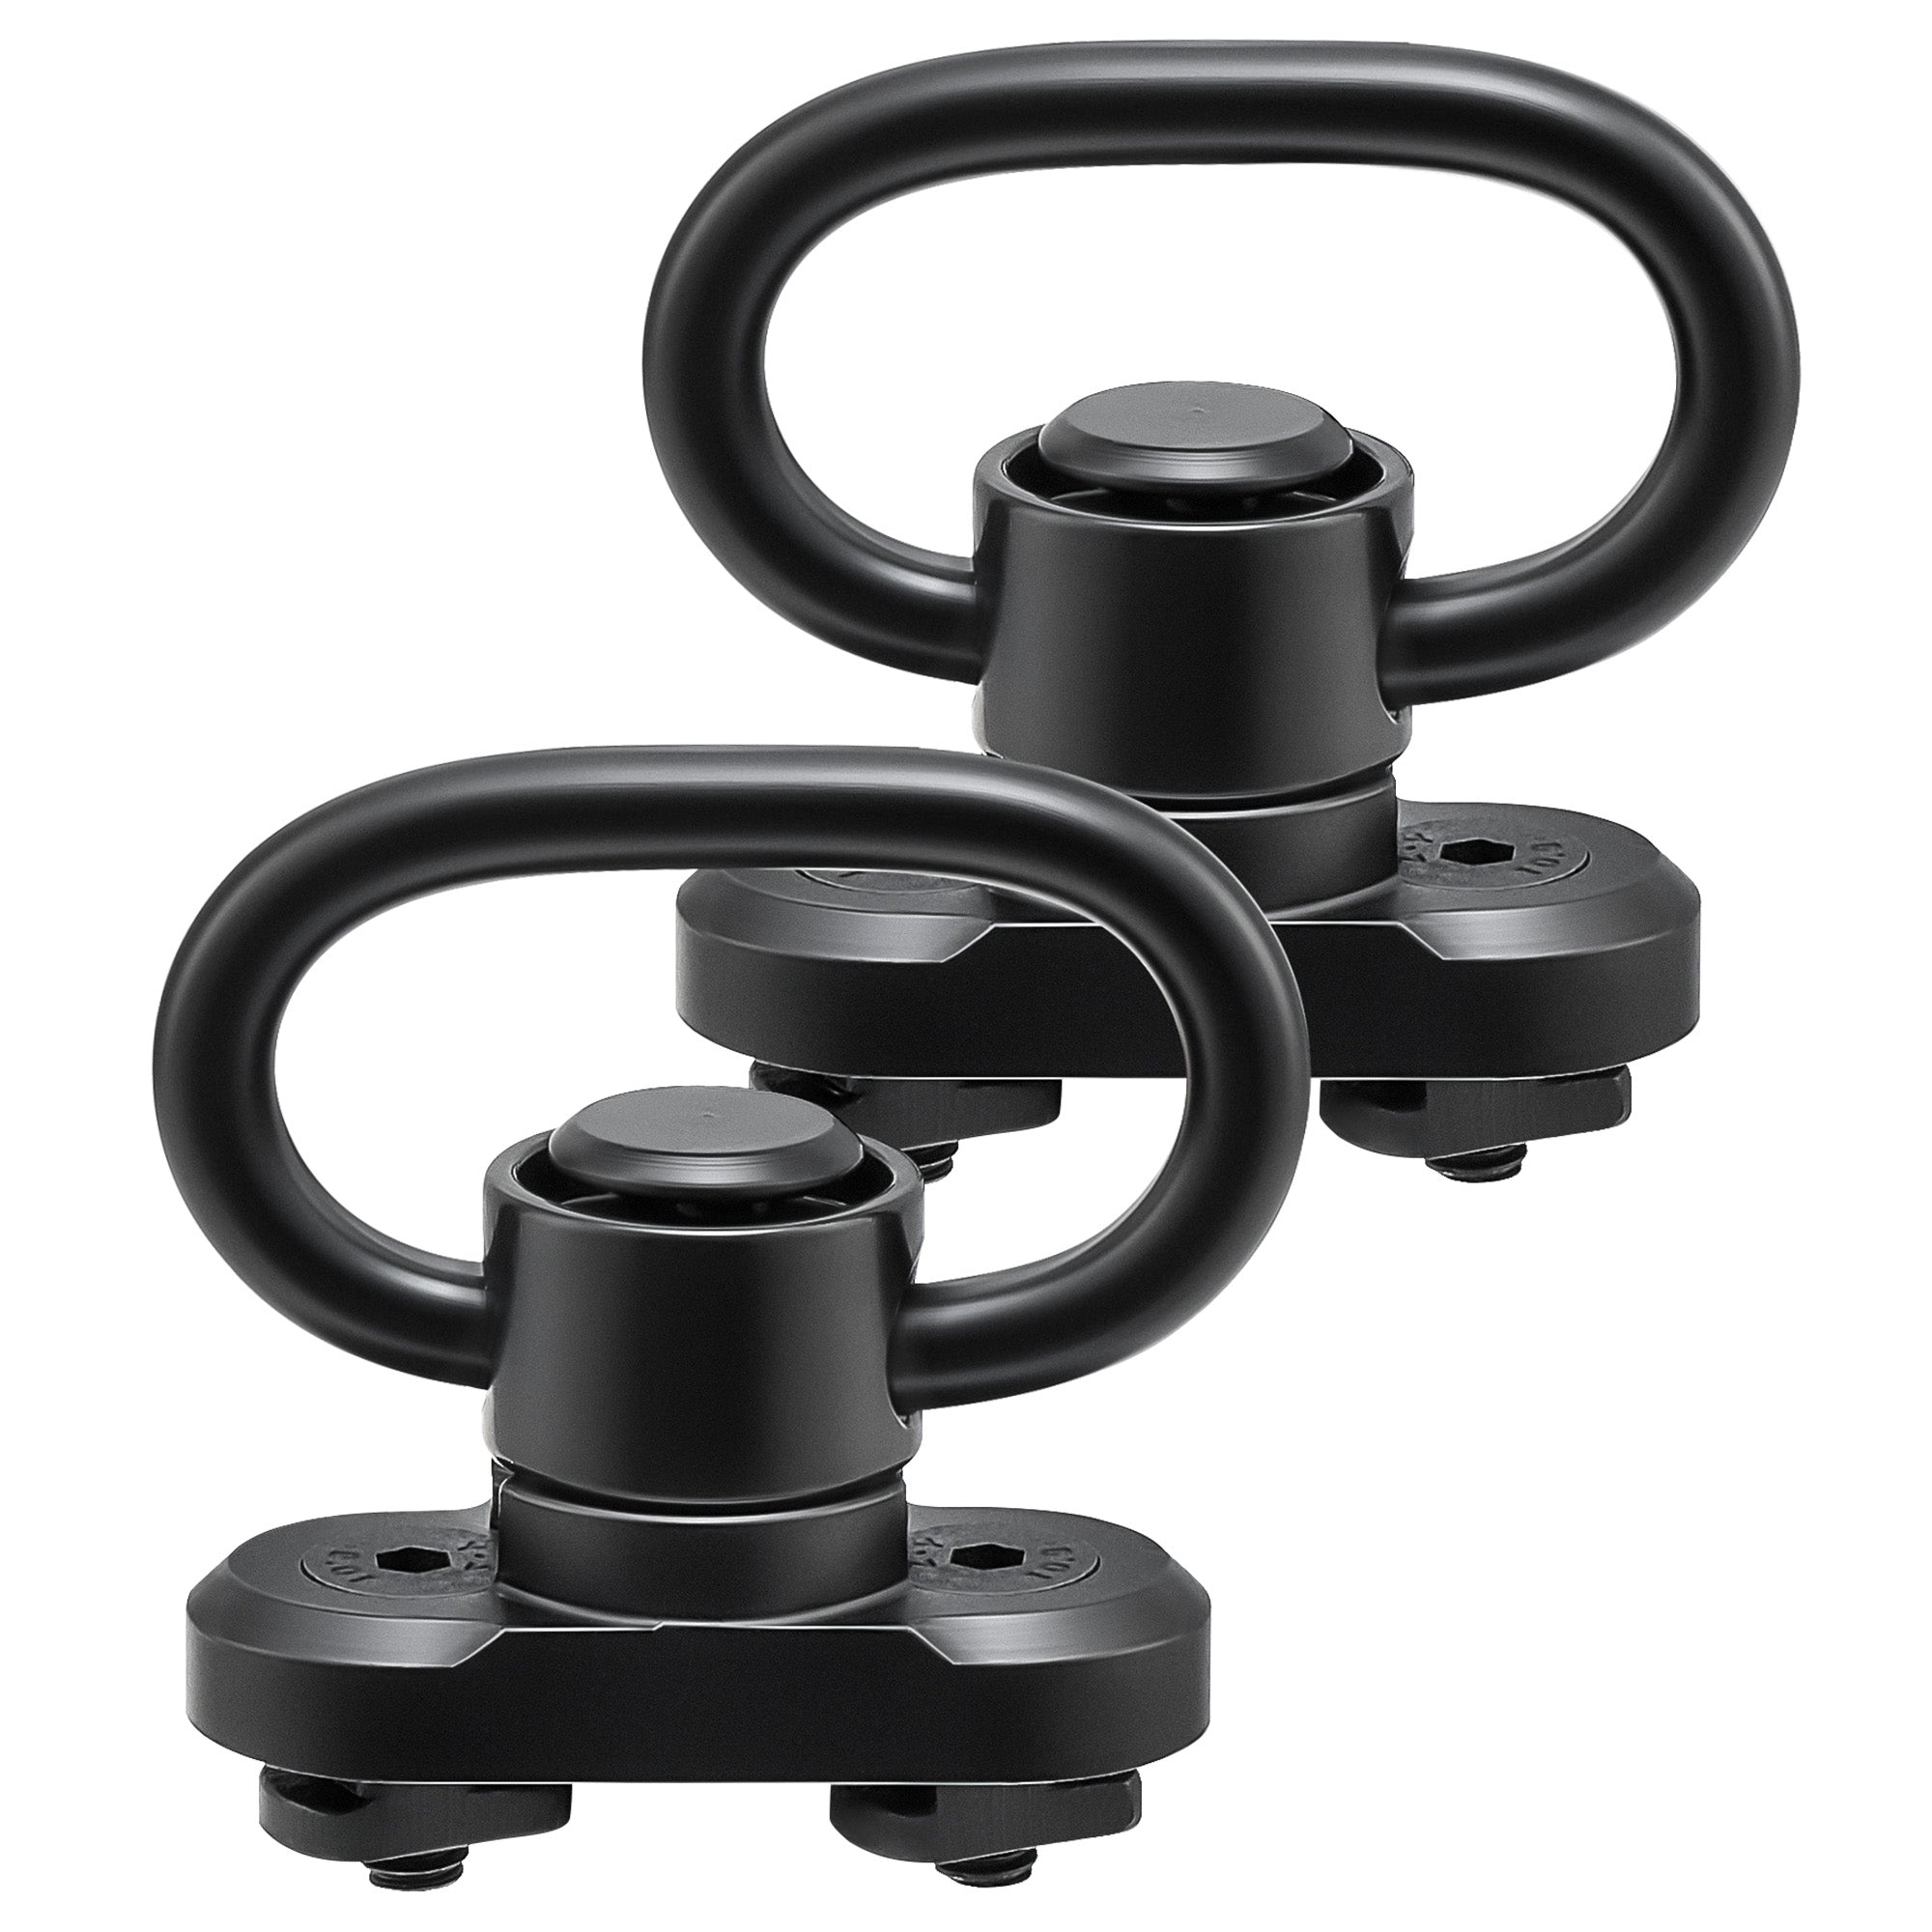 M-Lok Sling Mount 1.25" Two Point Sling Swivel Mount Quick Detach Sling Attachment with Press Button